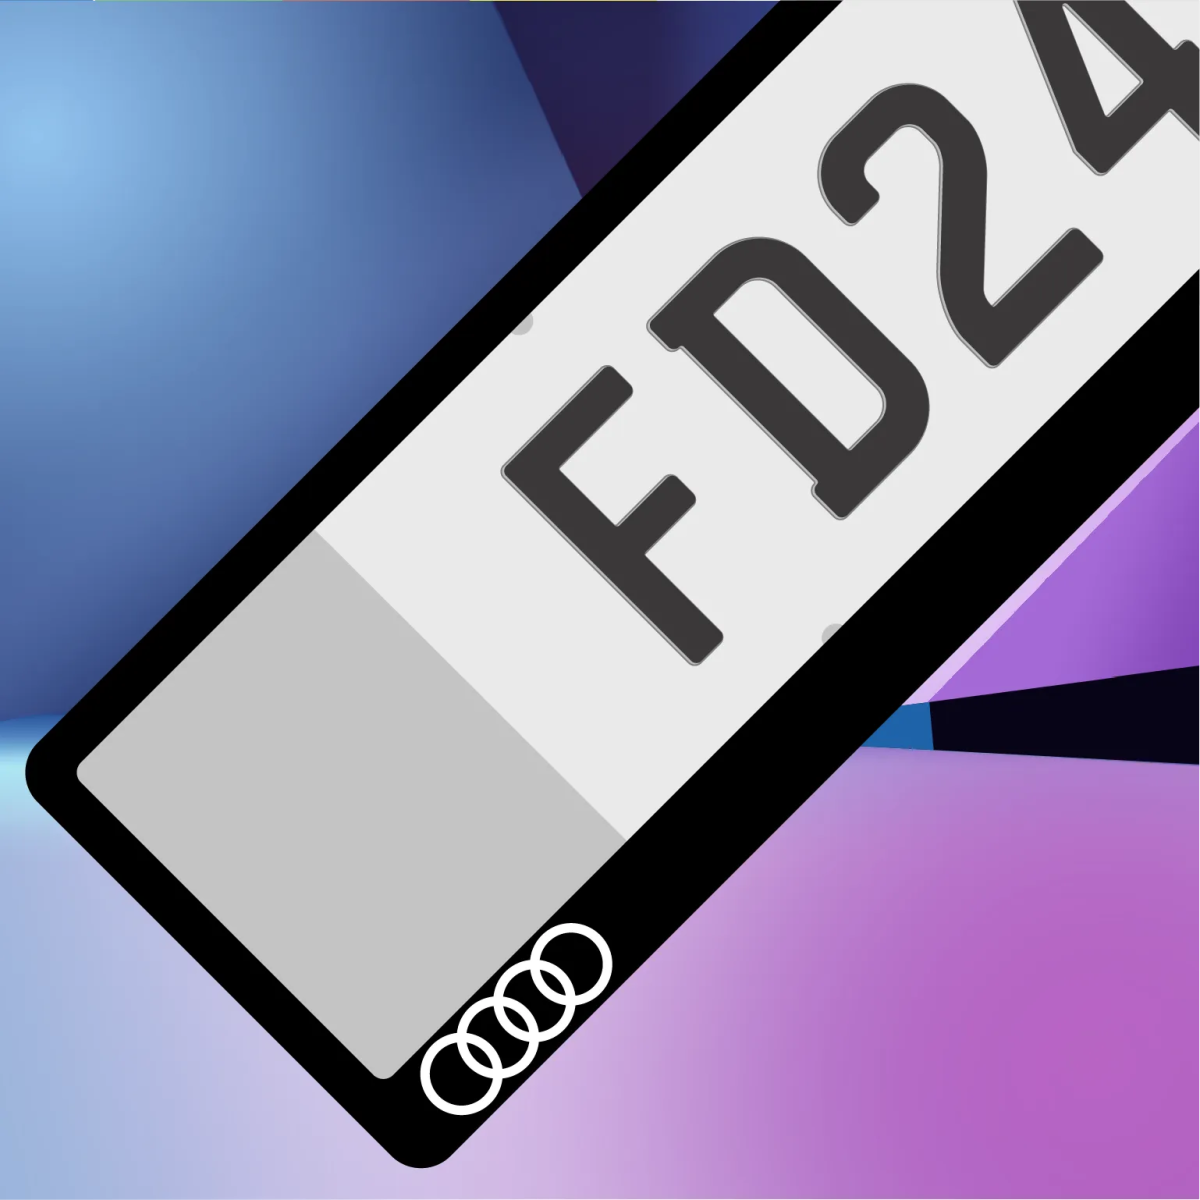 Audi Euro Plate Frames - Filthy Dog Decals